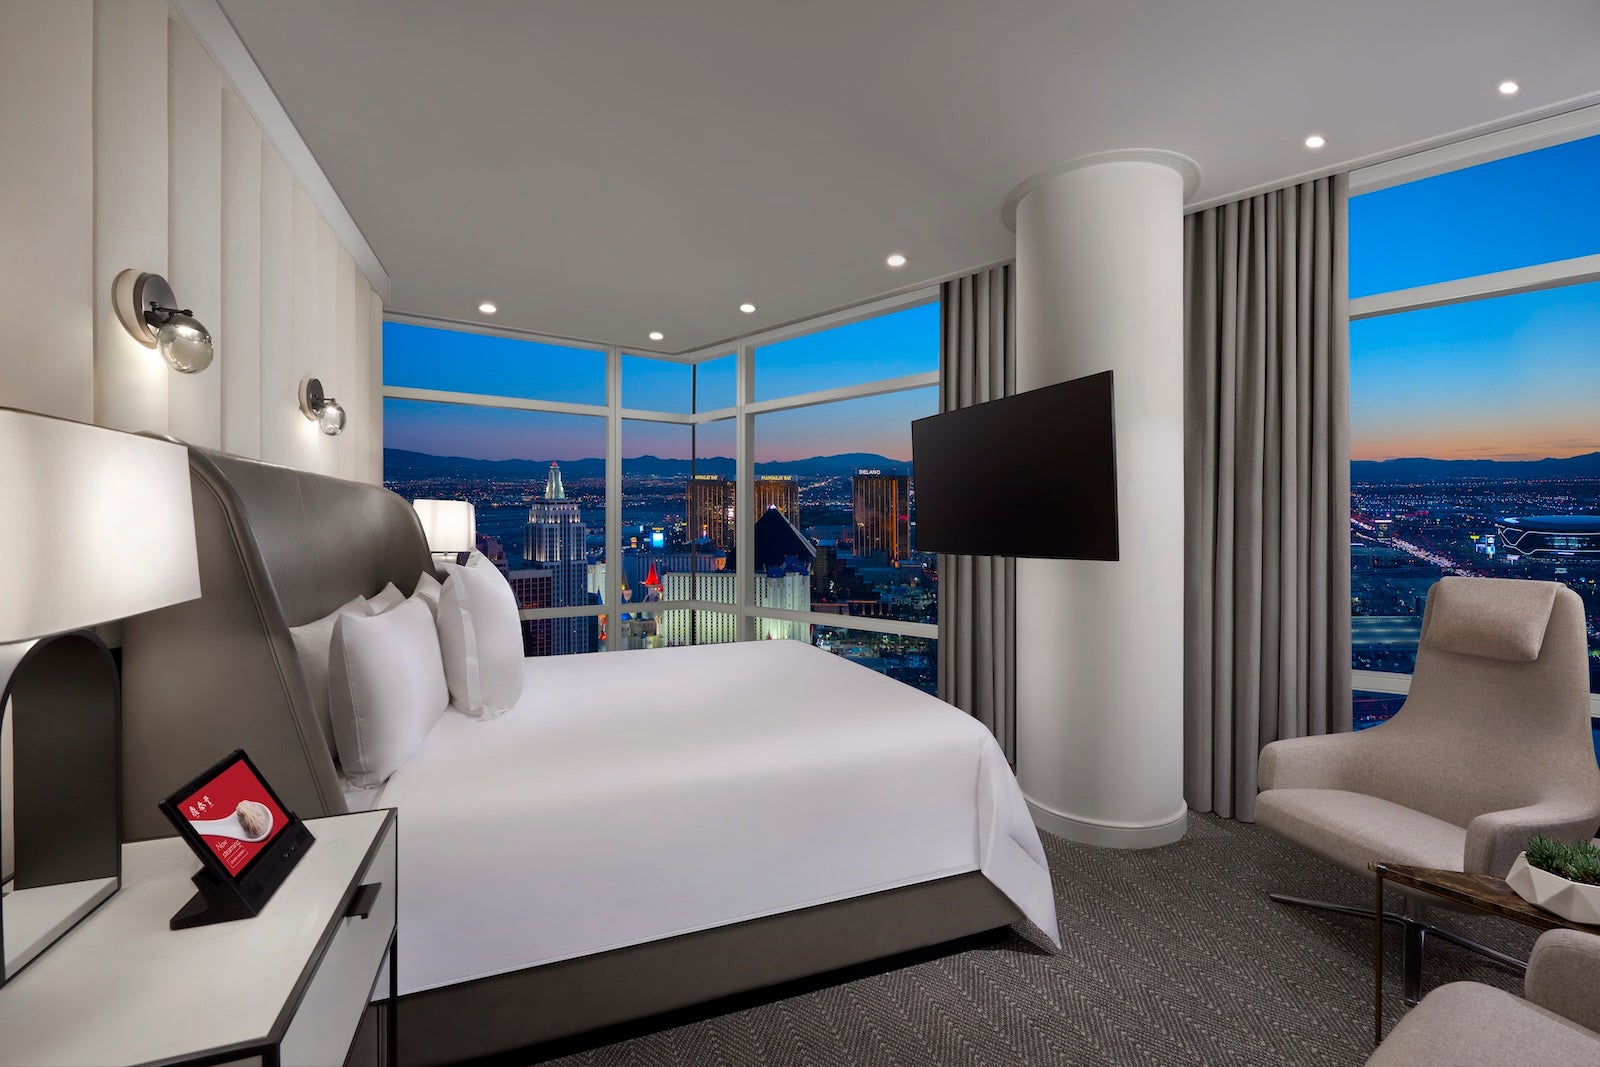 Exclusive: The luxury hotel rooms that don't want you to stay